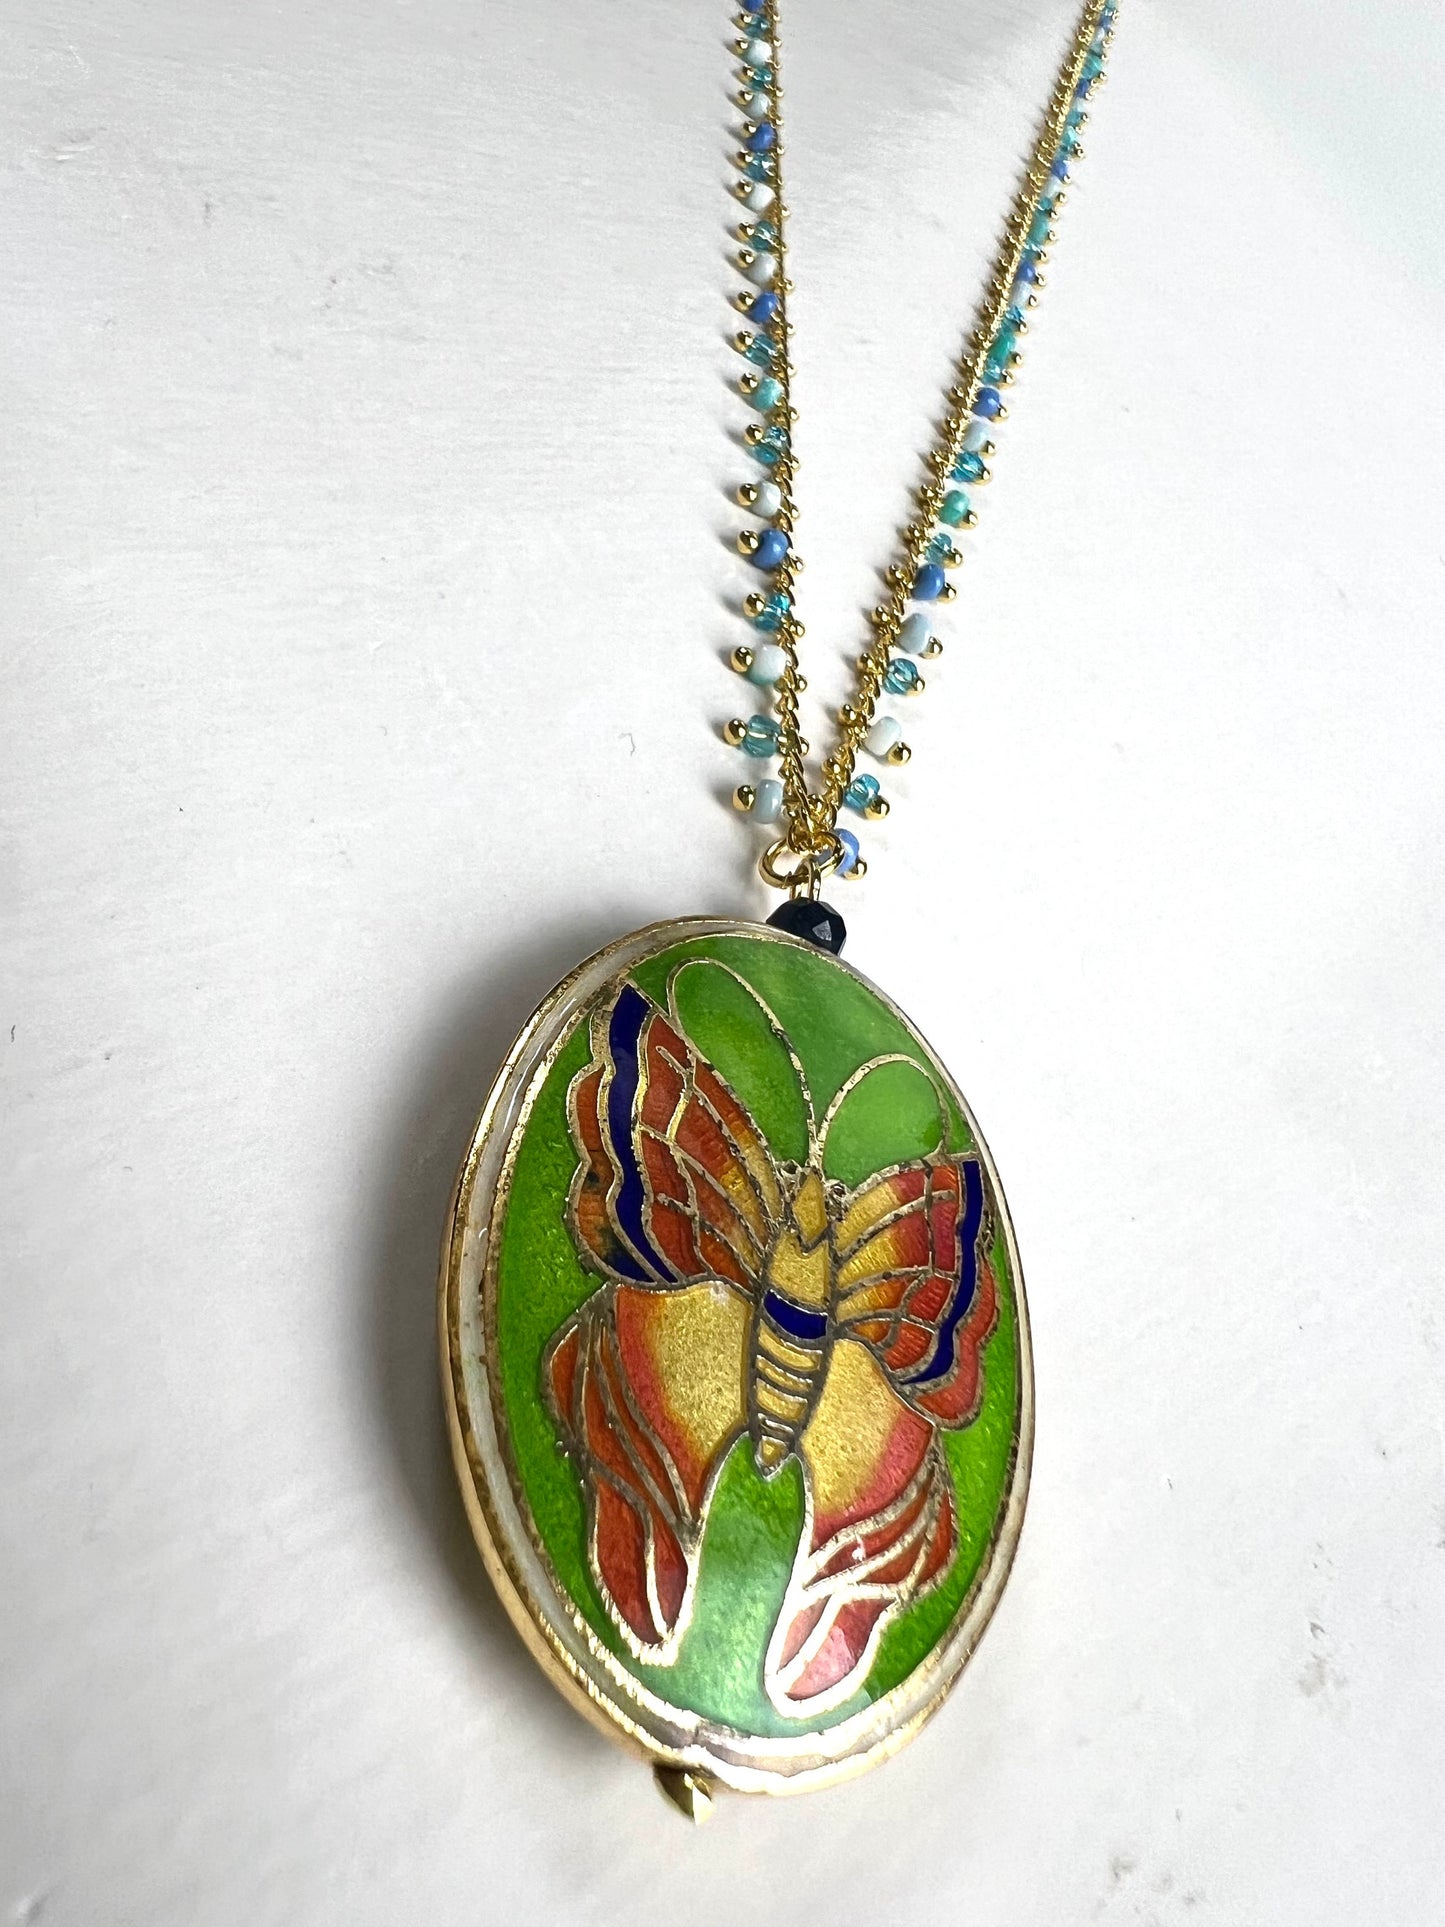 Traditional Cloisonné Pendant Vintage Butterfly Focal with matching Gold Beaded Chain 22” Necklace .Orange green pendant and blue green